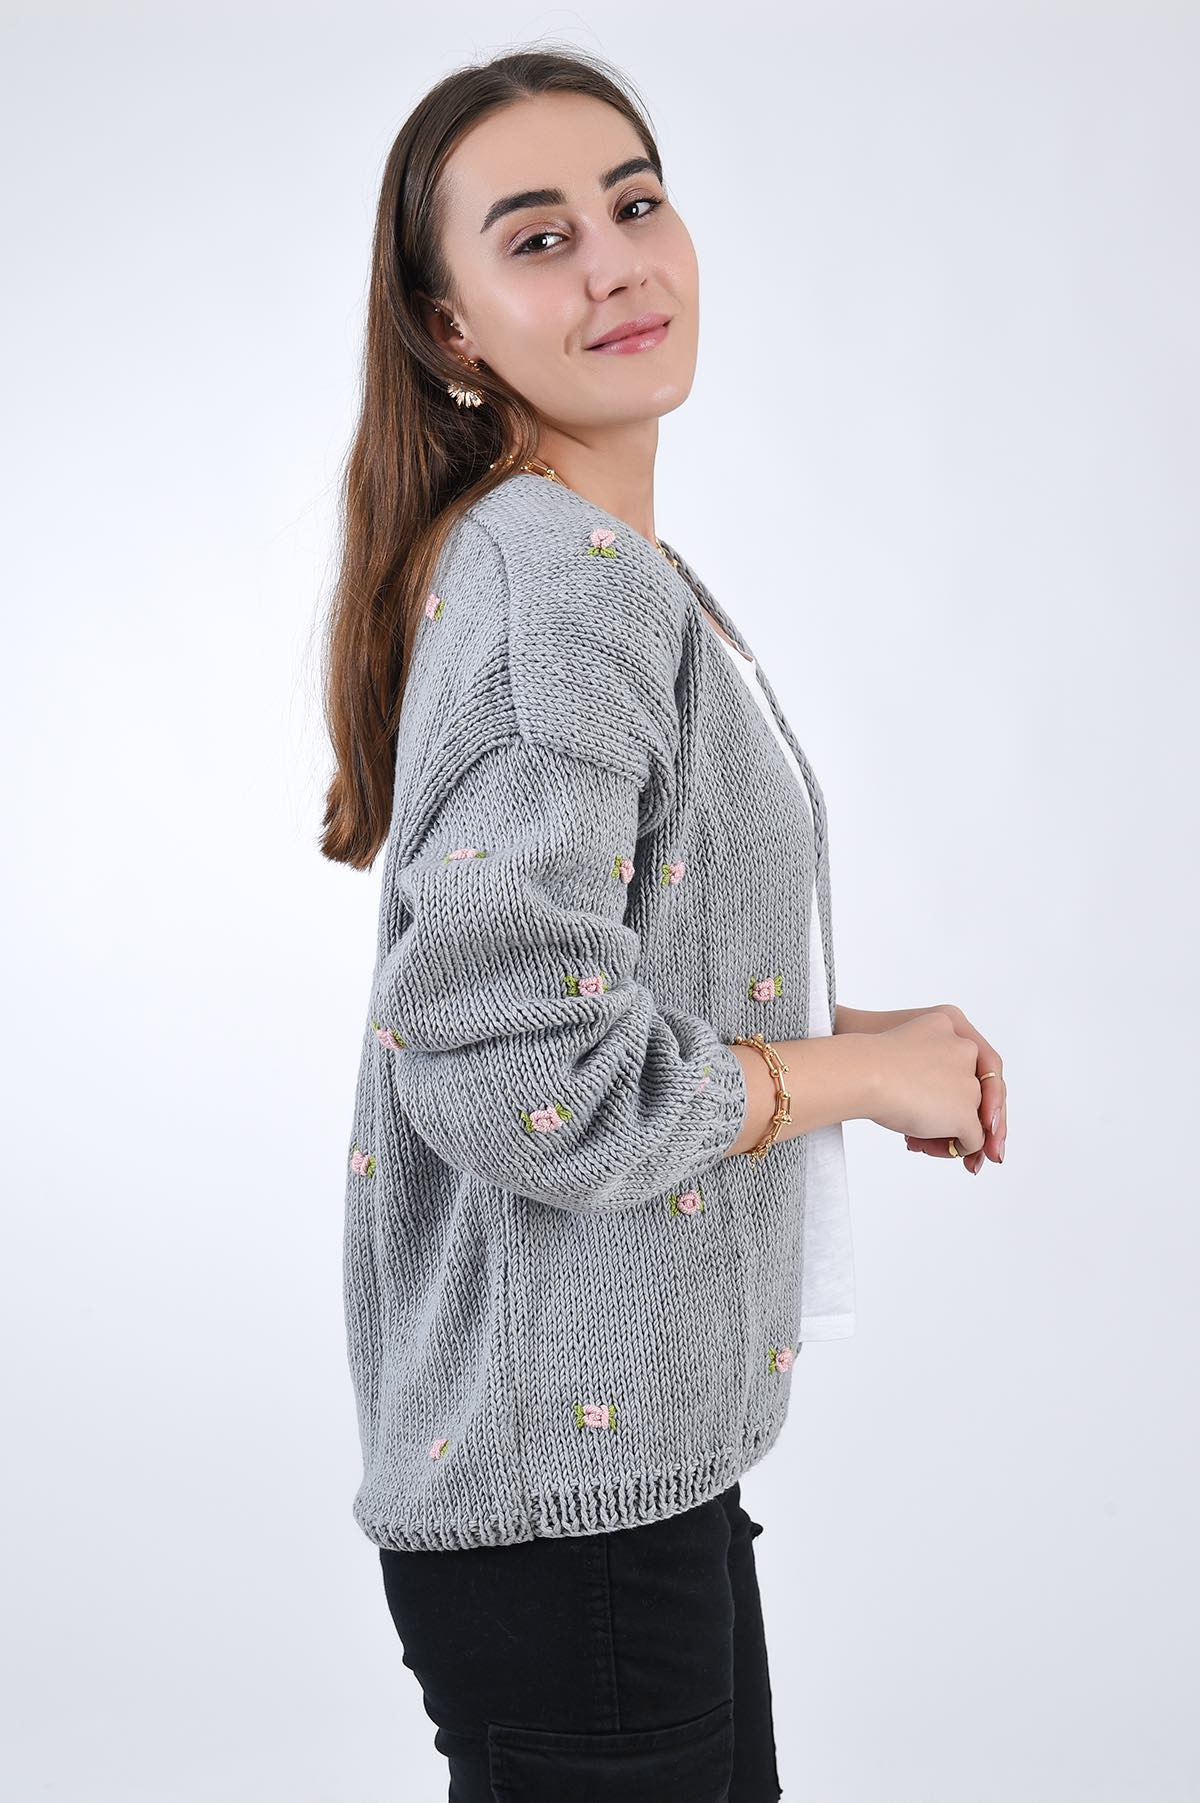 WINTER BLOOM PINK ROSE Cotton Cardigan by Fanm Mon